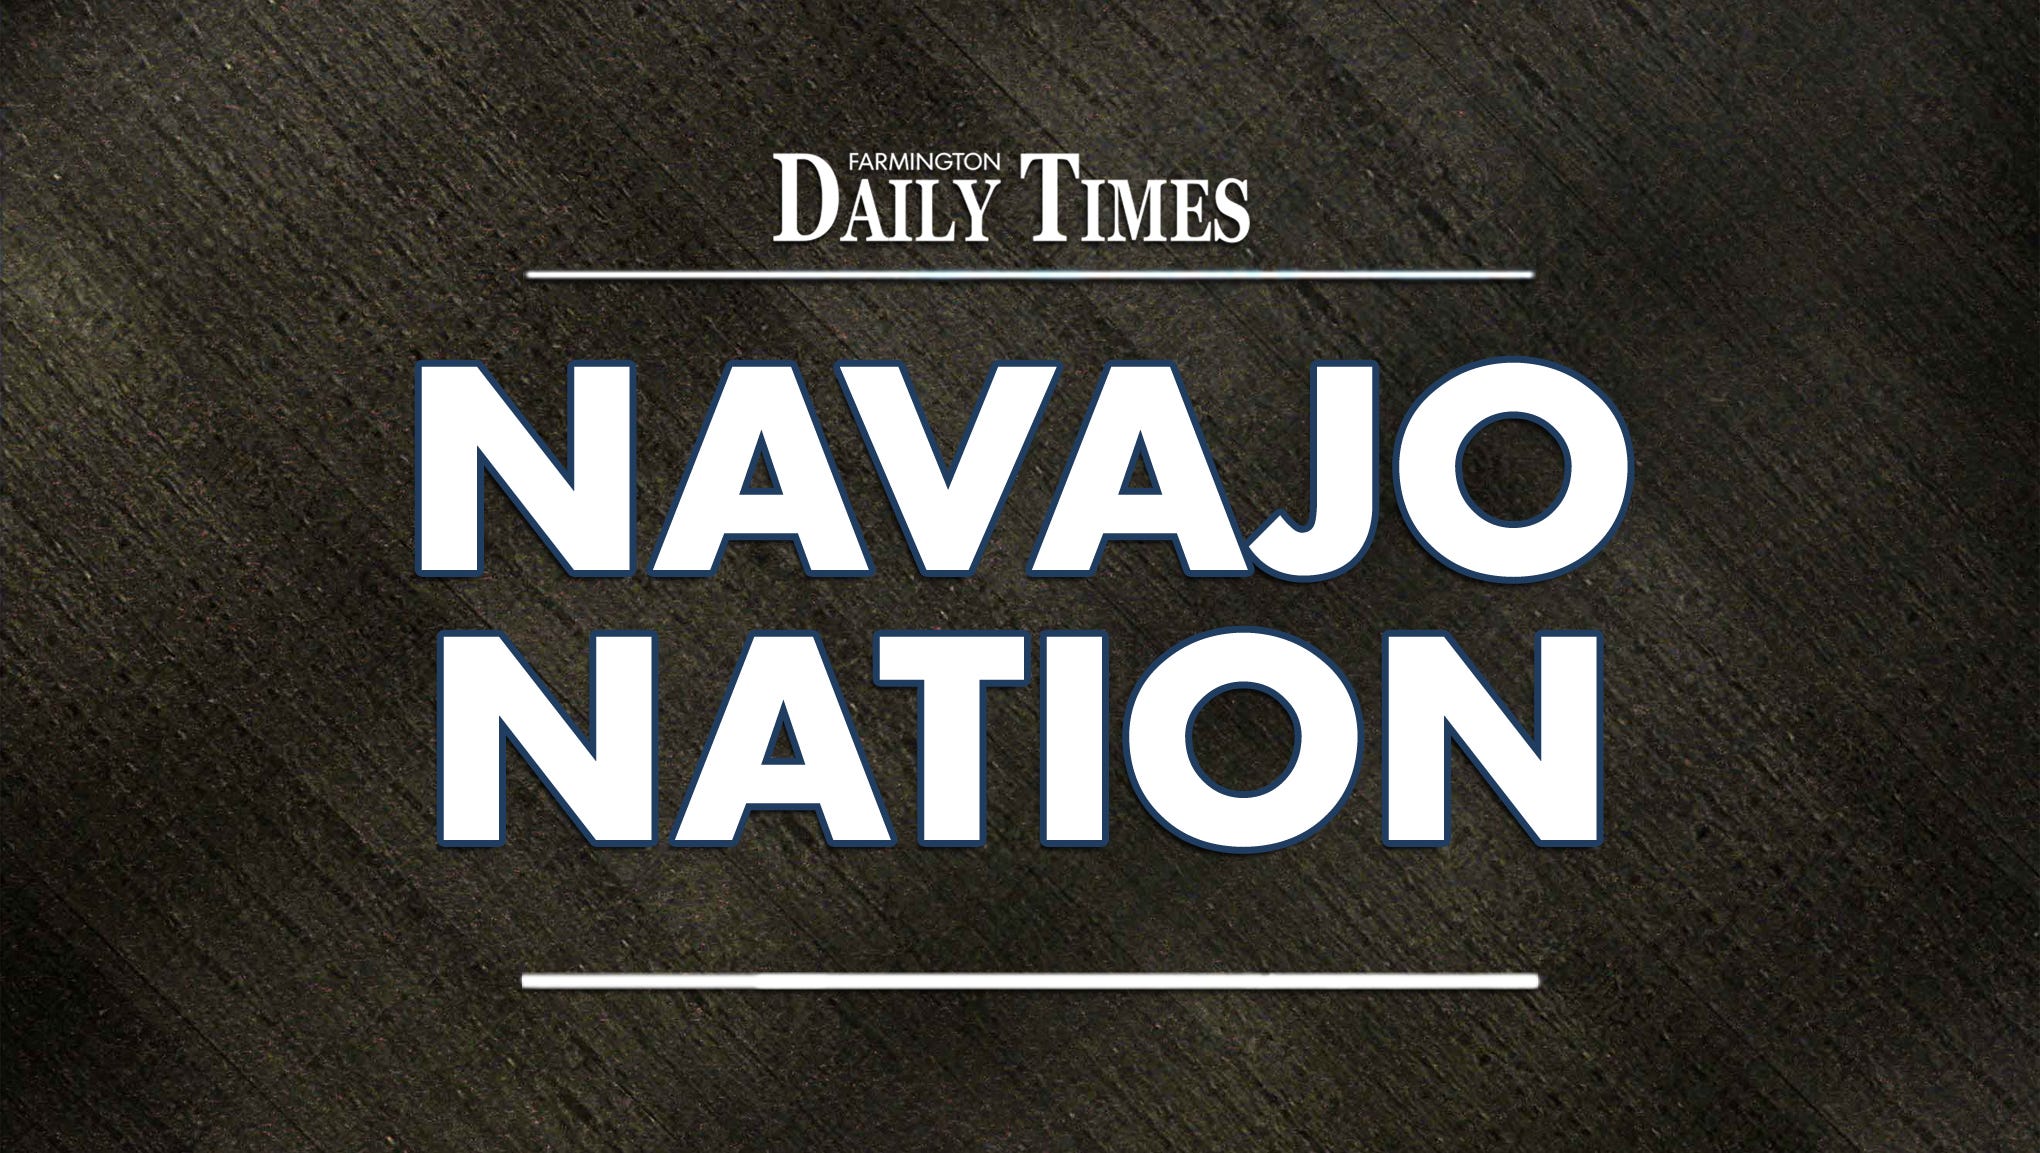 Navajo Nation looks to use portion of ARPA funds on infrastructure, hardship assistance - Farmington Daily Times